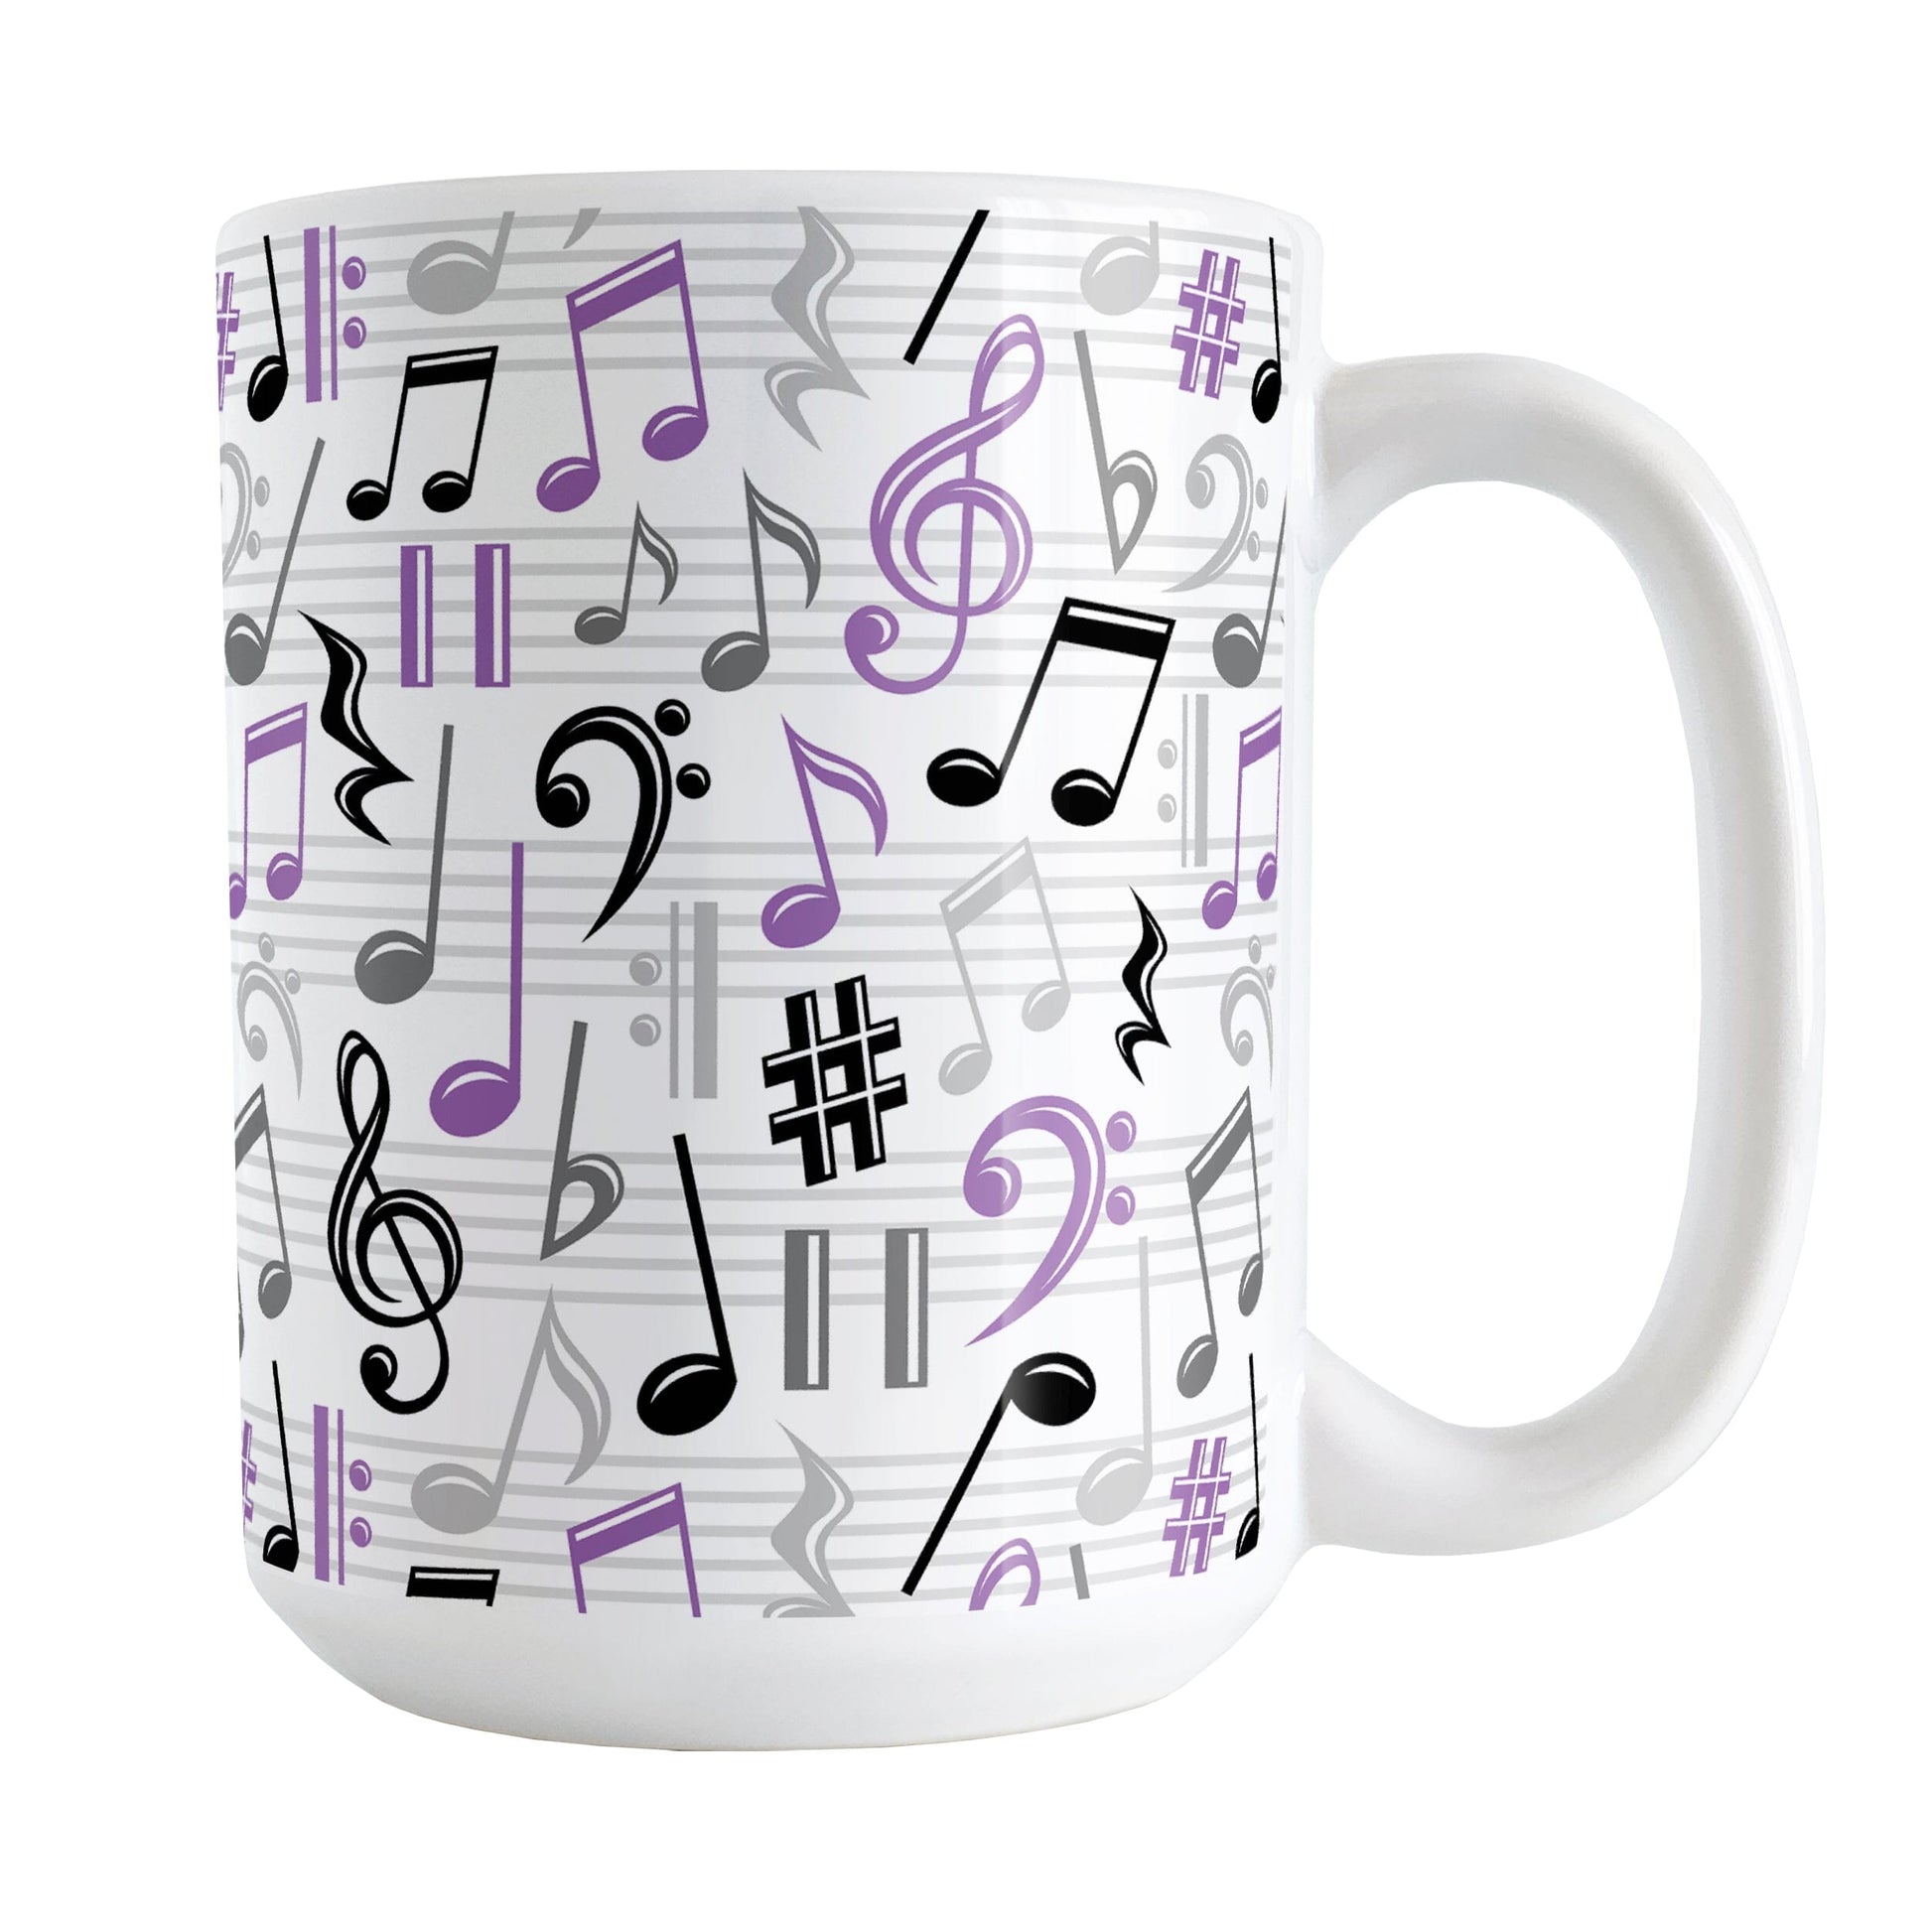 Purple Music Notes Pattern Mug (15oz) at Amy's Coffee Mugs. A ceramic coffee mug designed with music notes and symbols in purple, black, and gray in a pattern that wraps around the mug to the handle.